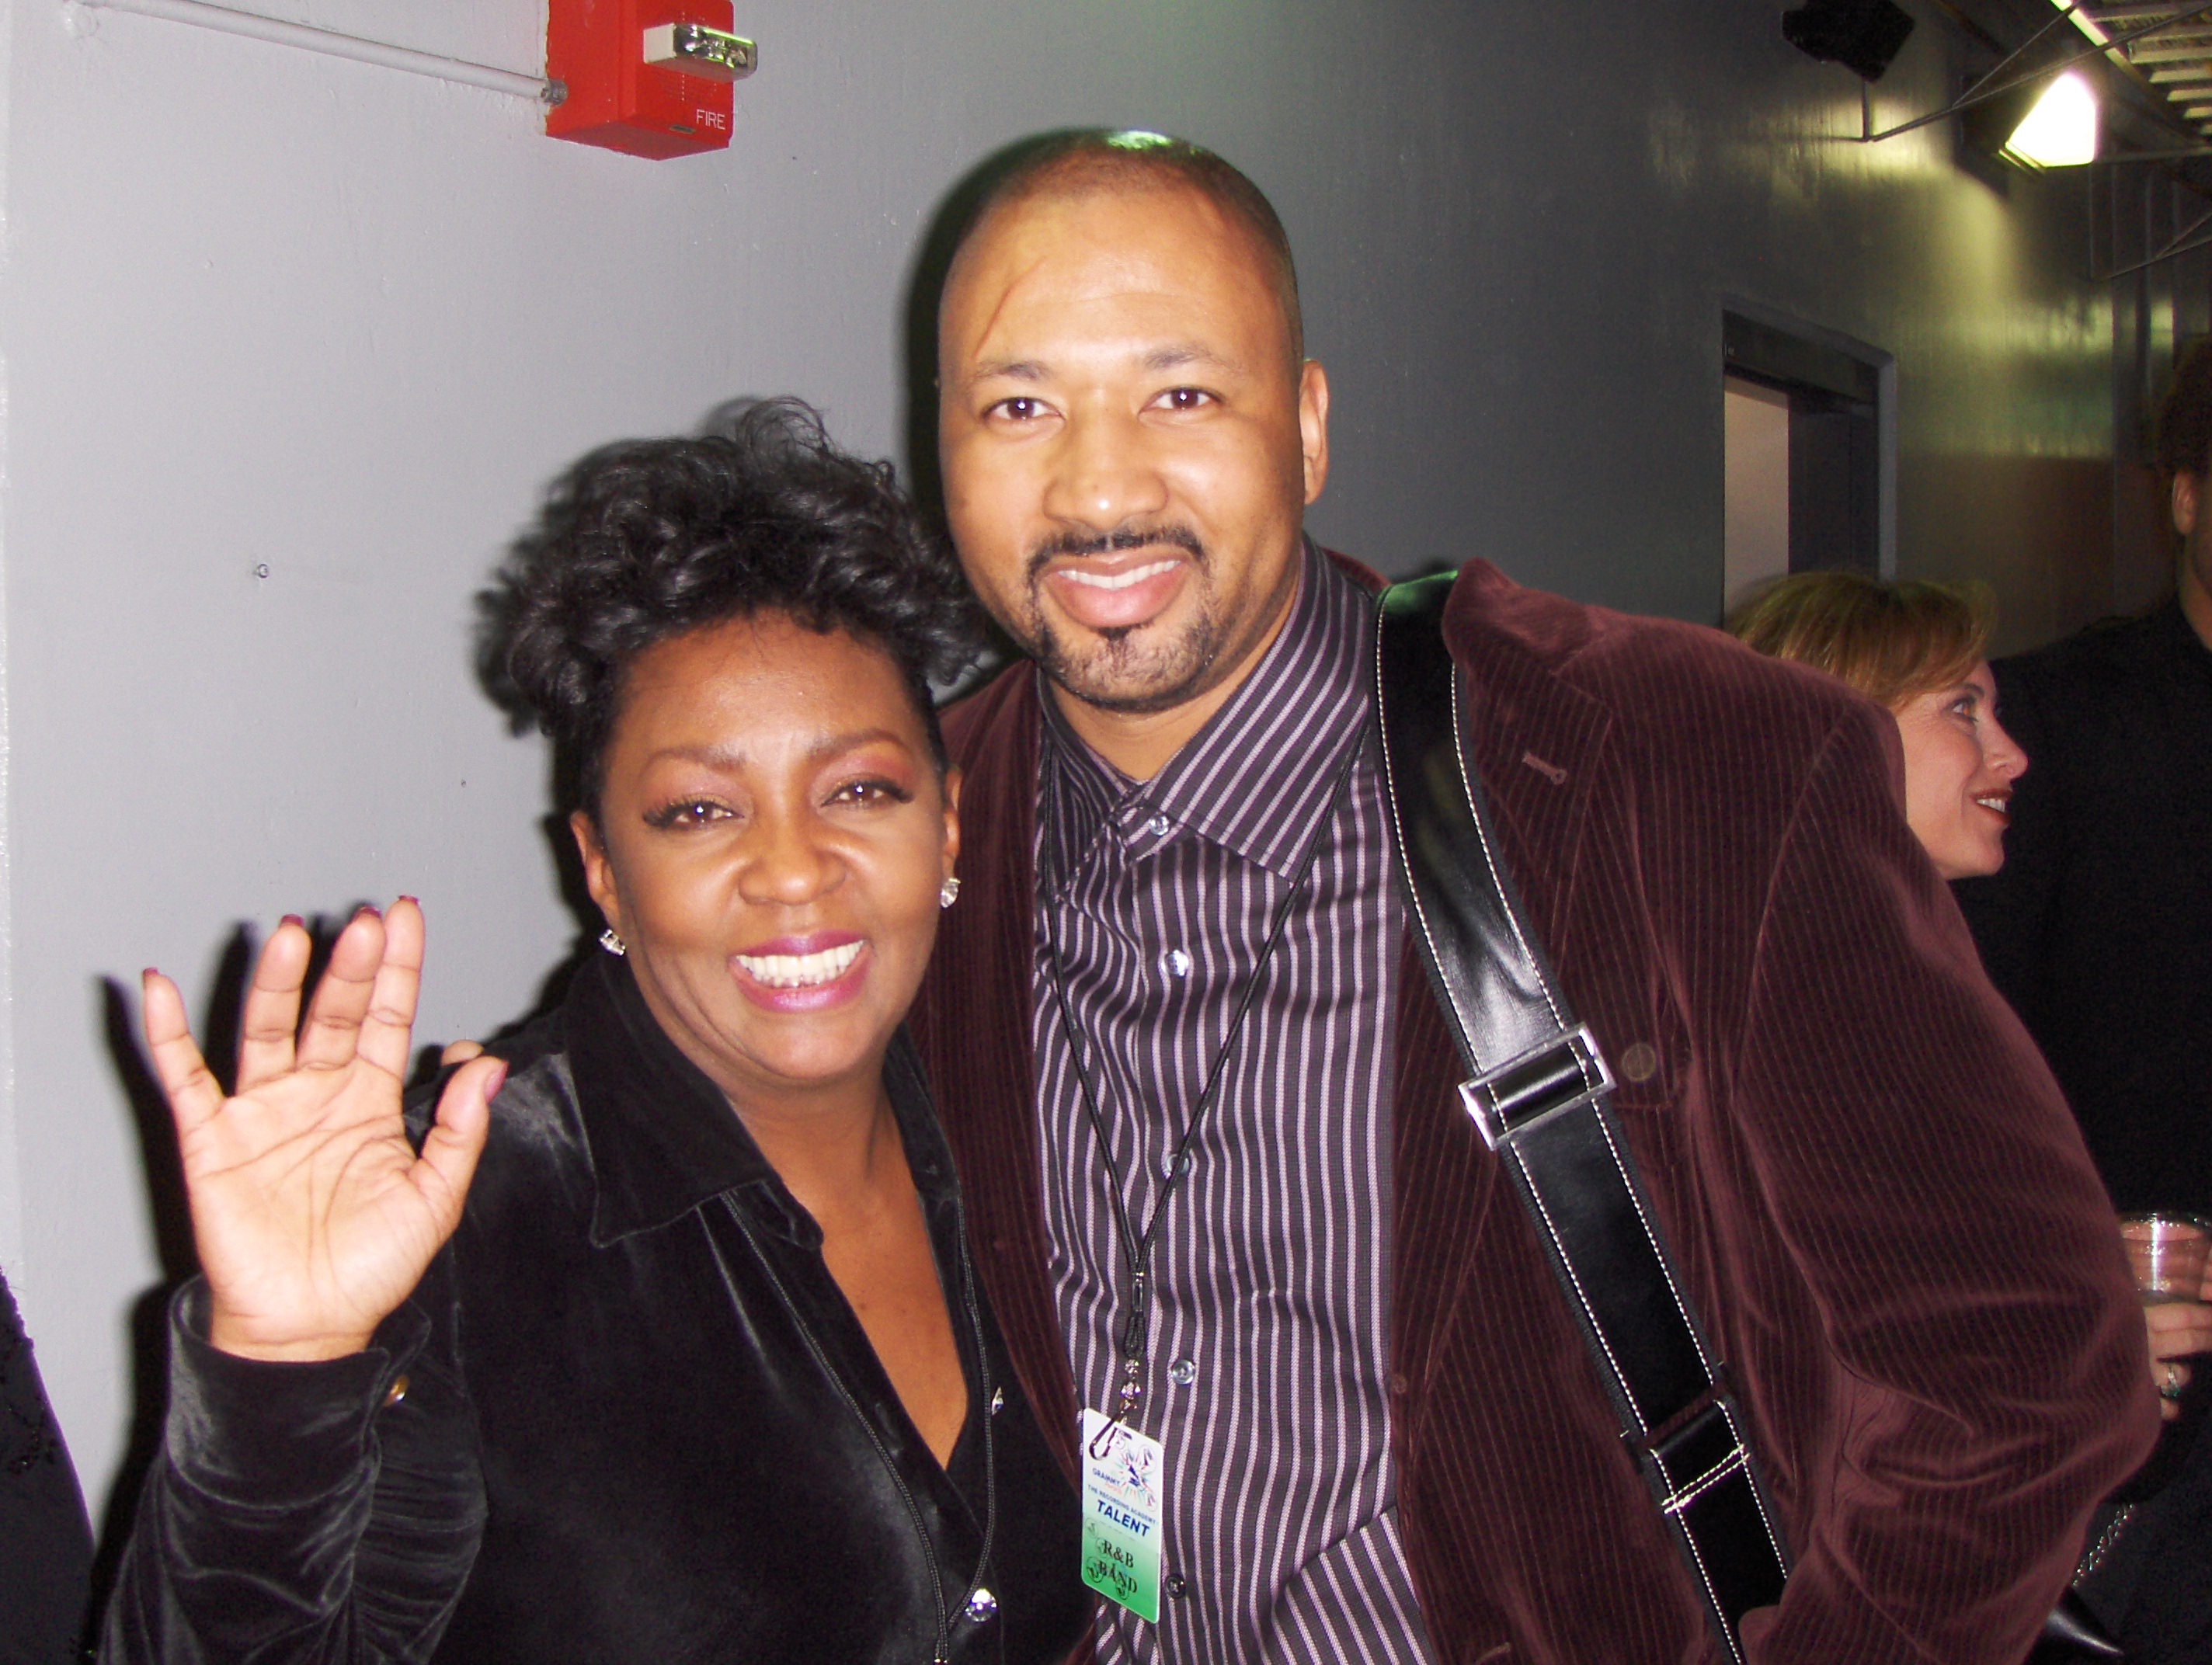 Alex Al with Anita Baker after performance.